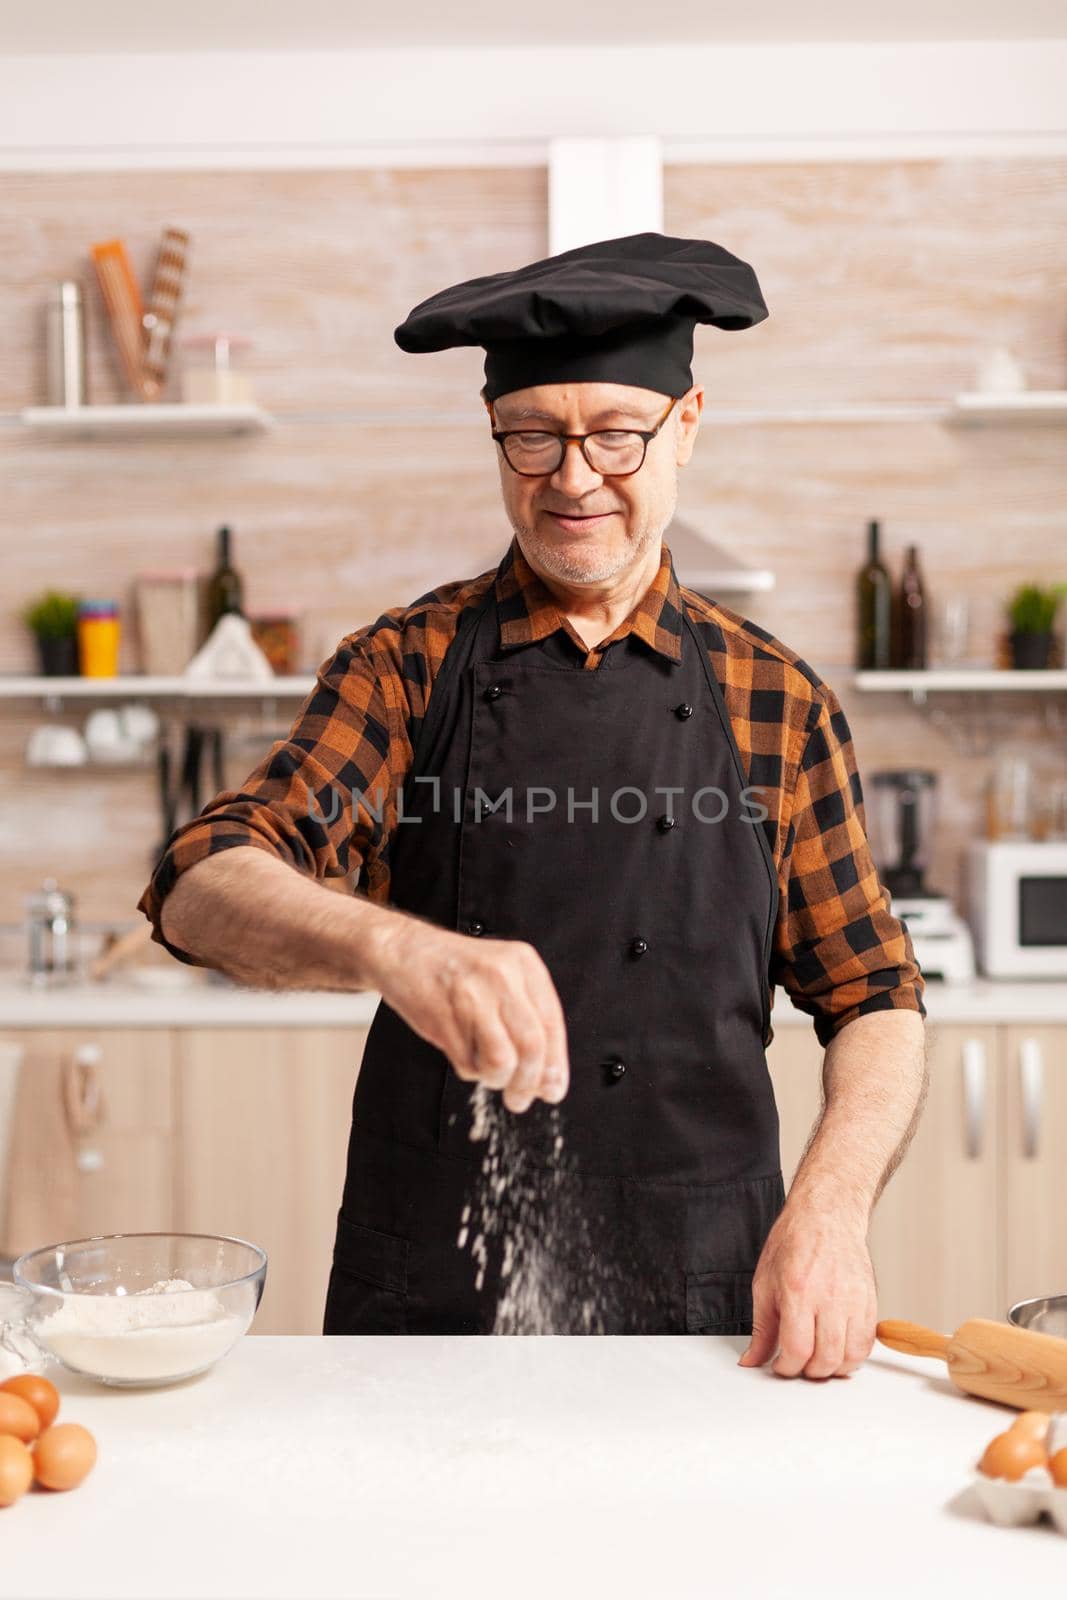 Happy retired chef preparing homemade pizza using bio wheat flour. Retired senior chef with bonete and apron, in kitchen uniform sprinkling sieving sifting ingredients by hand.